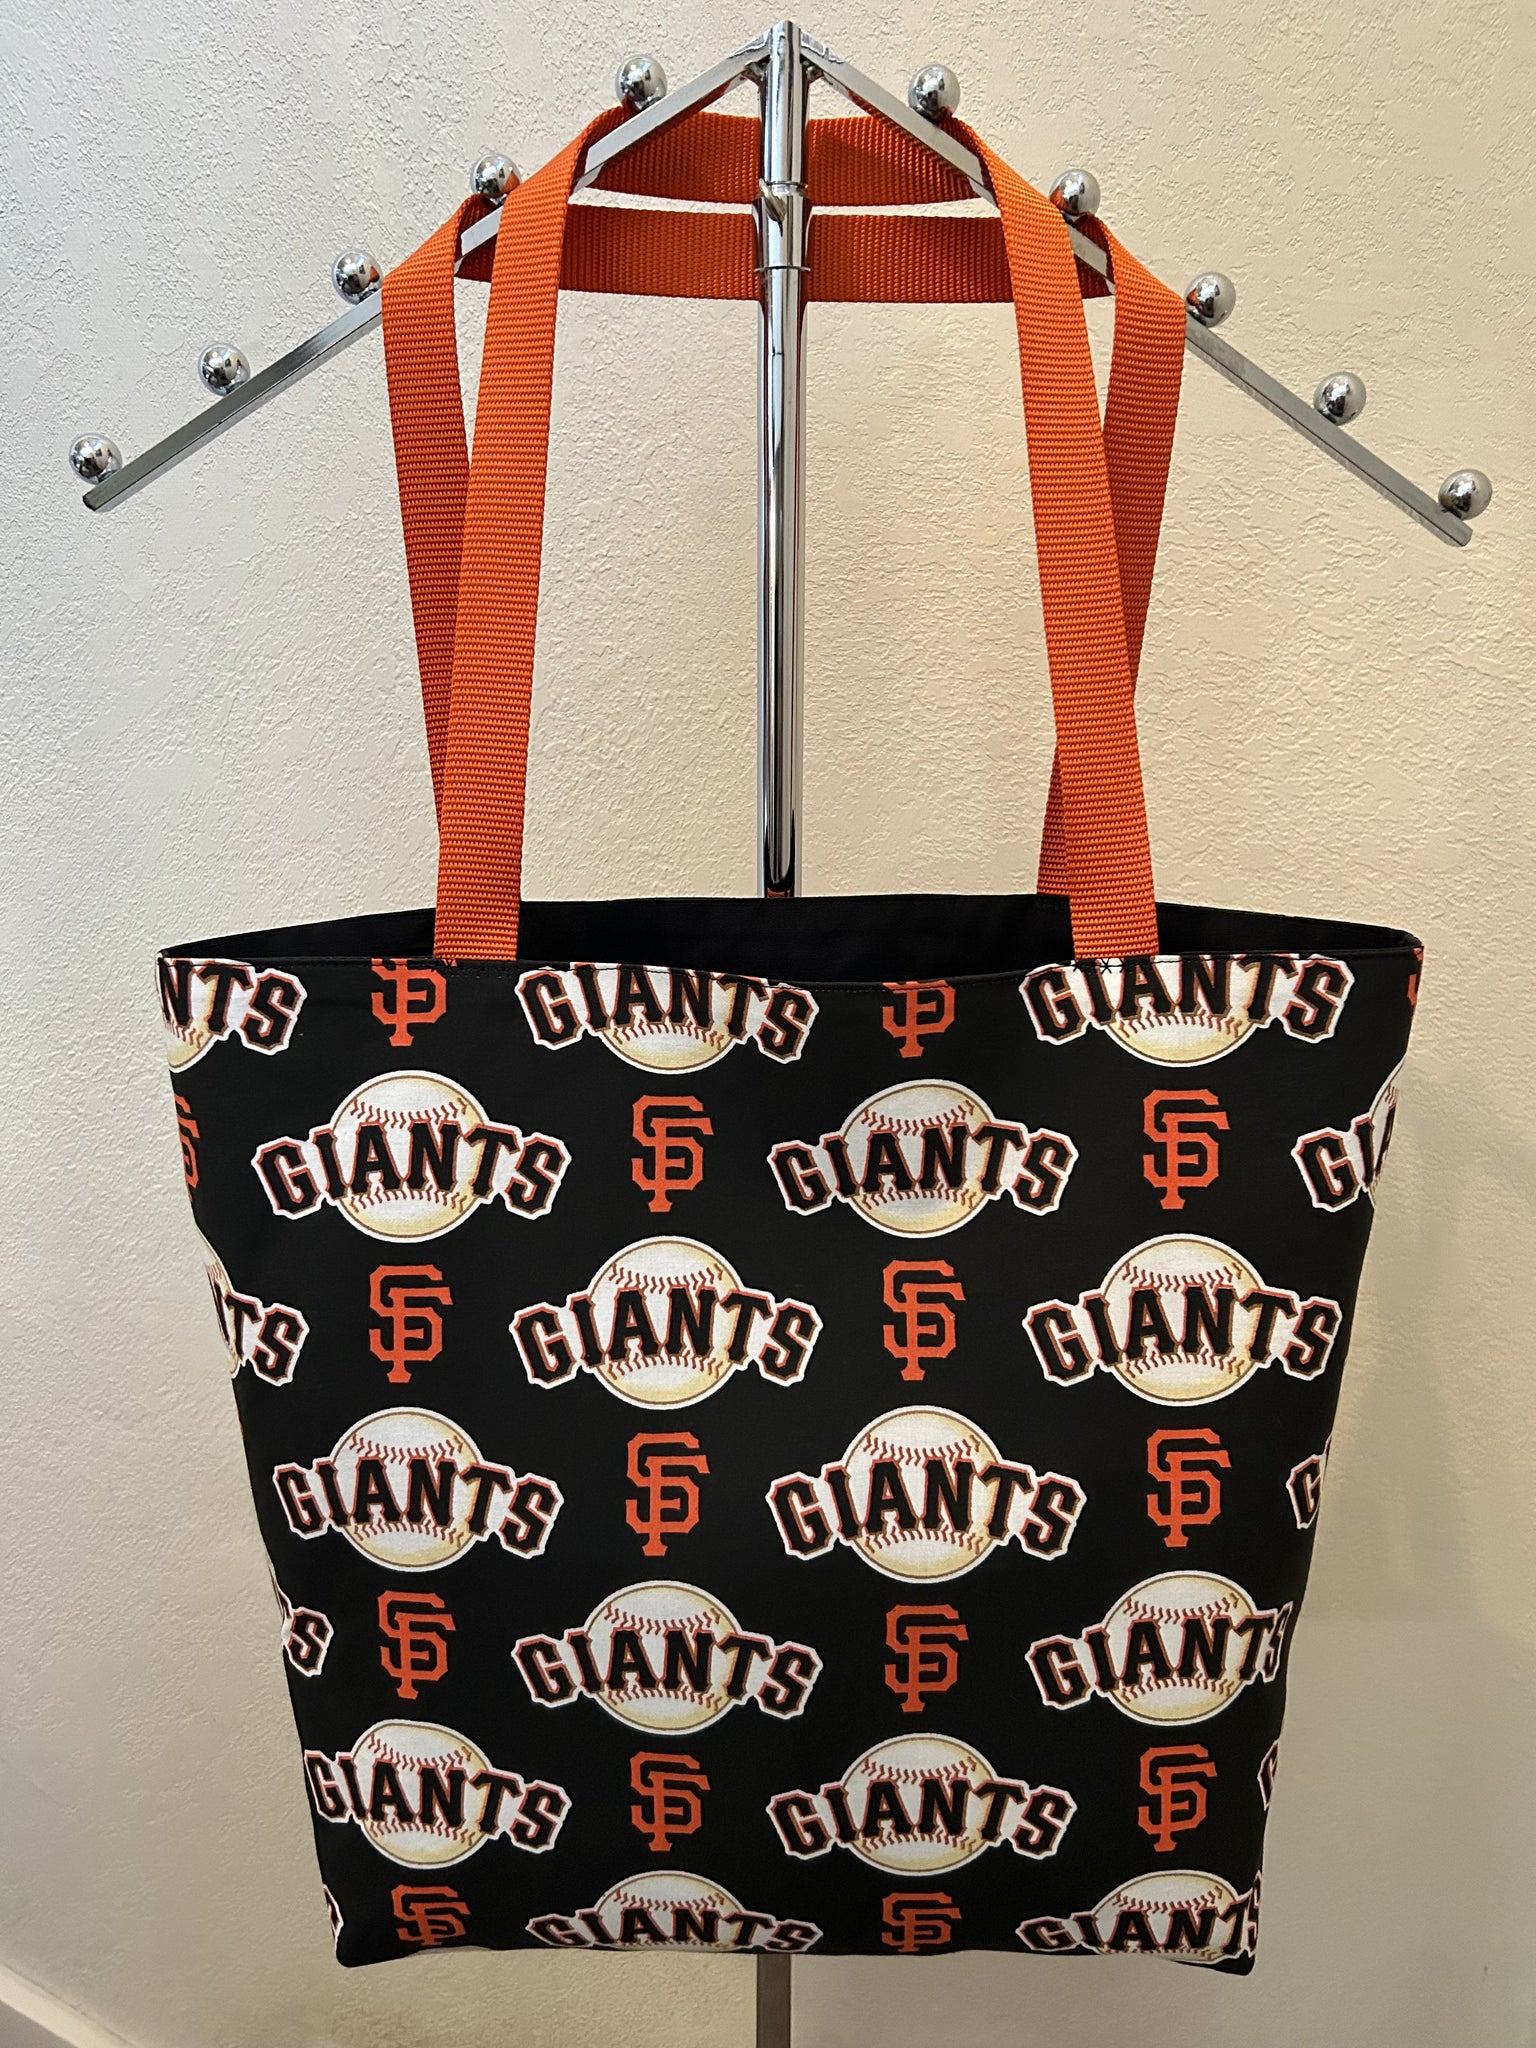 San Francisco Giants Baseball – Totes By Clydesdale